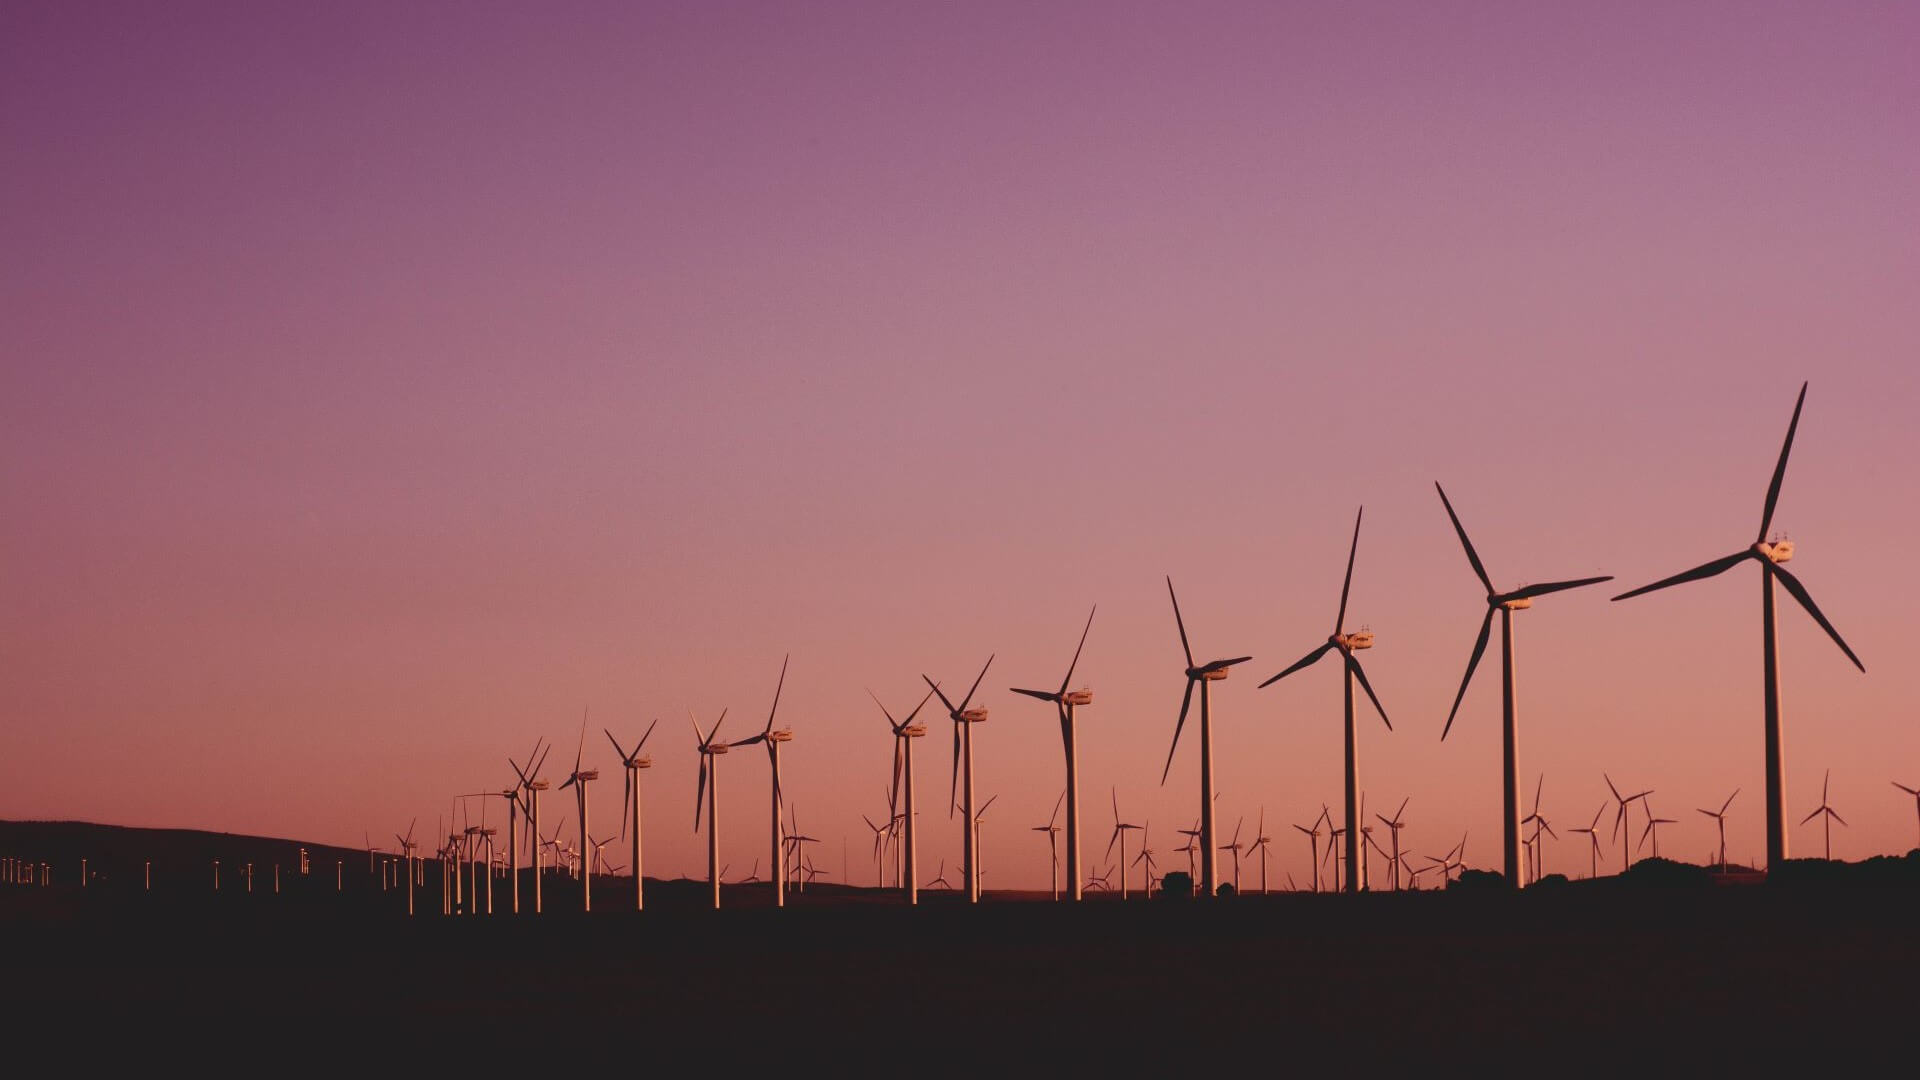 Row of onshore wind turbines set against pink and orange sunset